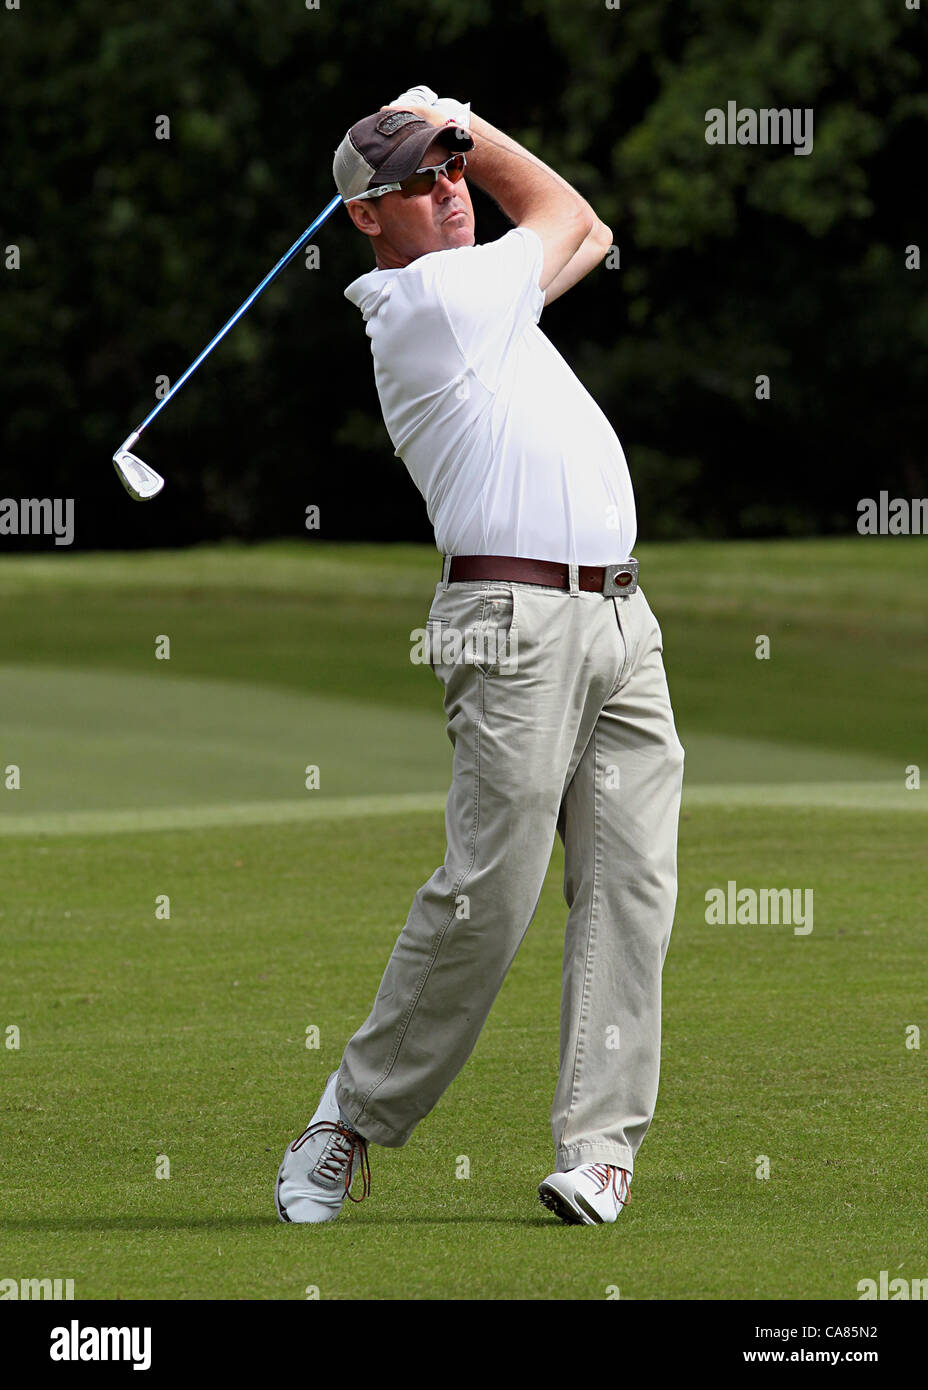 25.06.2012. Sunningdale Golf Club, Berkshire, England.  Former major champion Rich Beem of America teeing off during the International Final Qualifying for the Open Championship at Sunningdale Golf Club, Berkshire, England - Monday 25th June 2012 Stock Photo